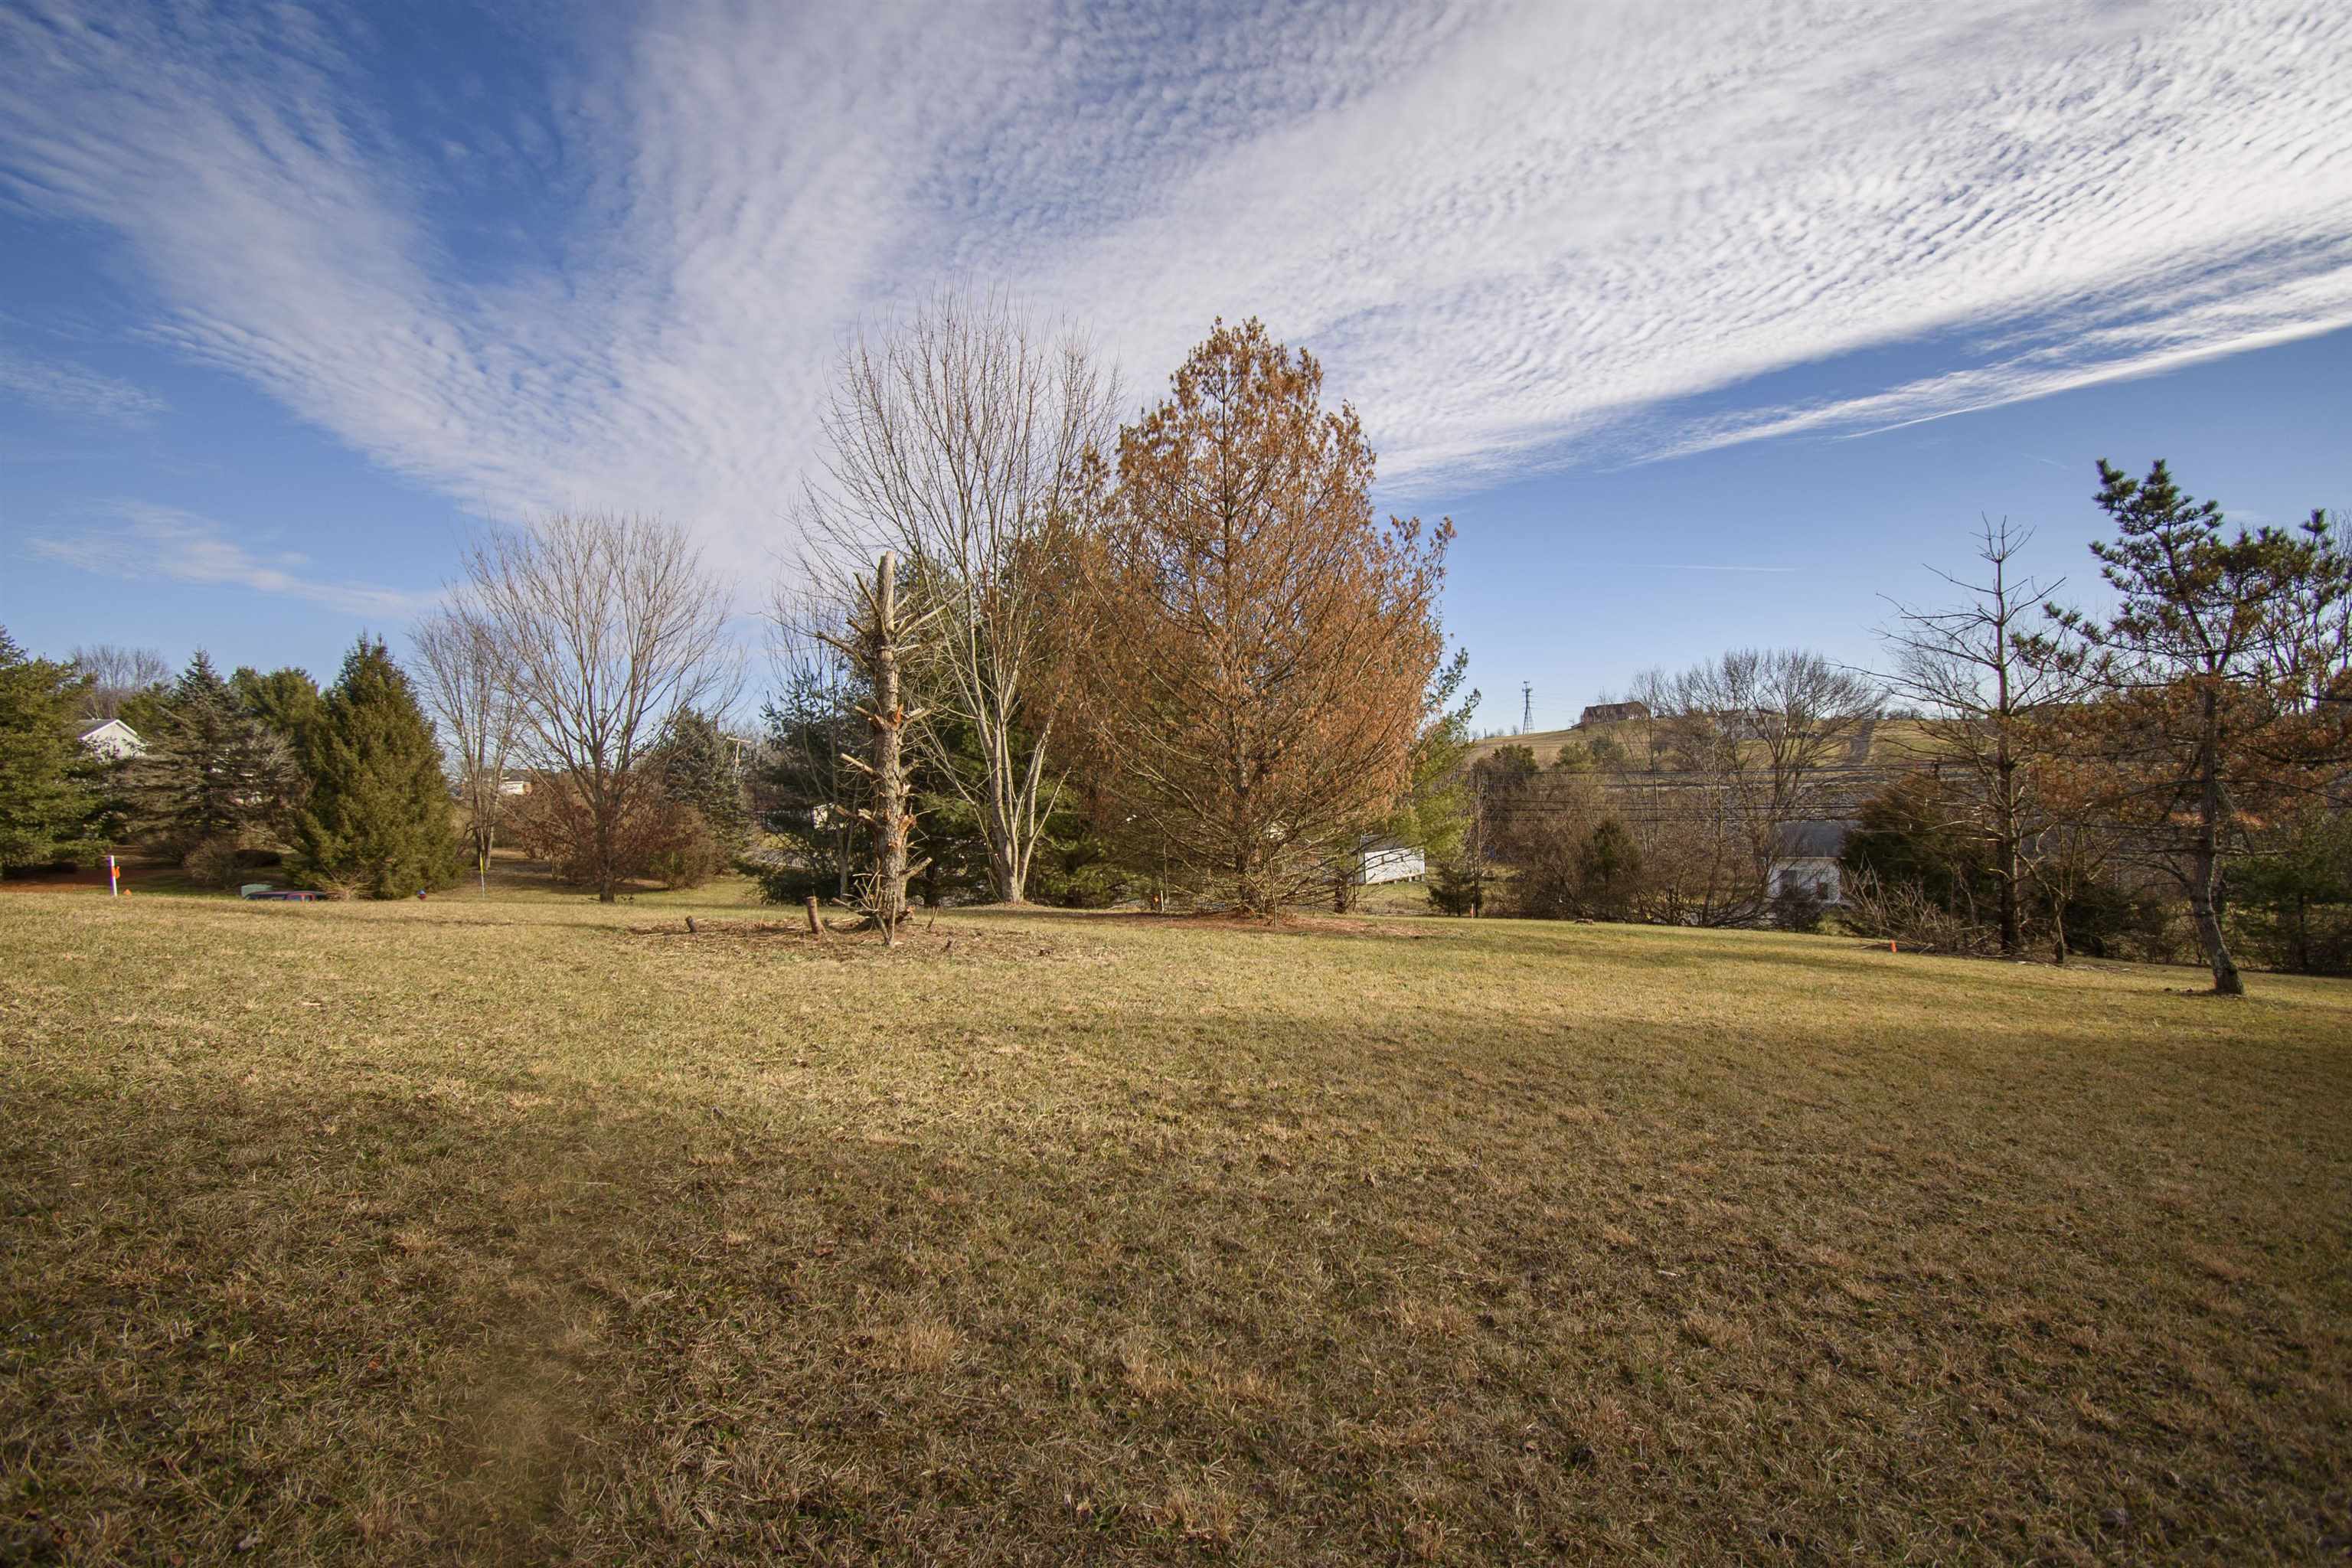 Discover the potential of this exceptional 1.1+ acre piece of land in the heart of Montgomery County.  A great location just outside the Christiansburg Town limits, minutes from I-81, Downtown Christiansburg, Radford, Carillon Hospital, Radford University, Blacksburg and Virginia Tech.  Access to public water, a completed 4 bedroom perk test, shared paved driveway entrance already in place with neighbor and minimal deed restrictions provide a great opportunity to build your dream home.  Don't miss out, call for more information and to schedule a showing today!